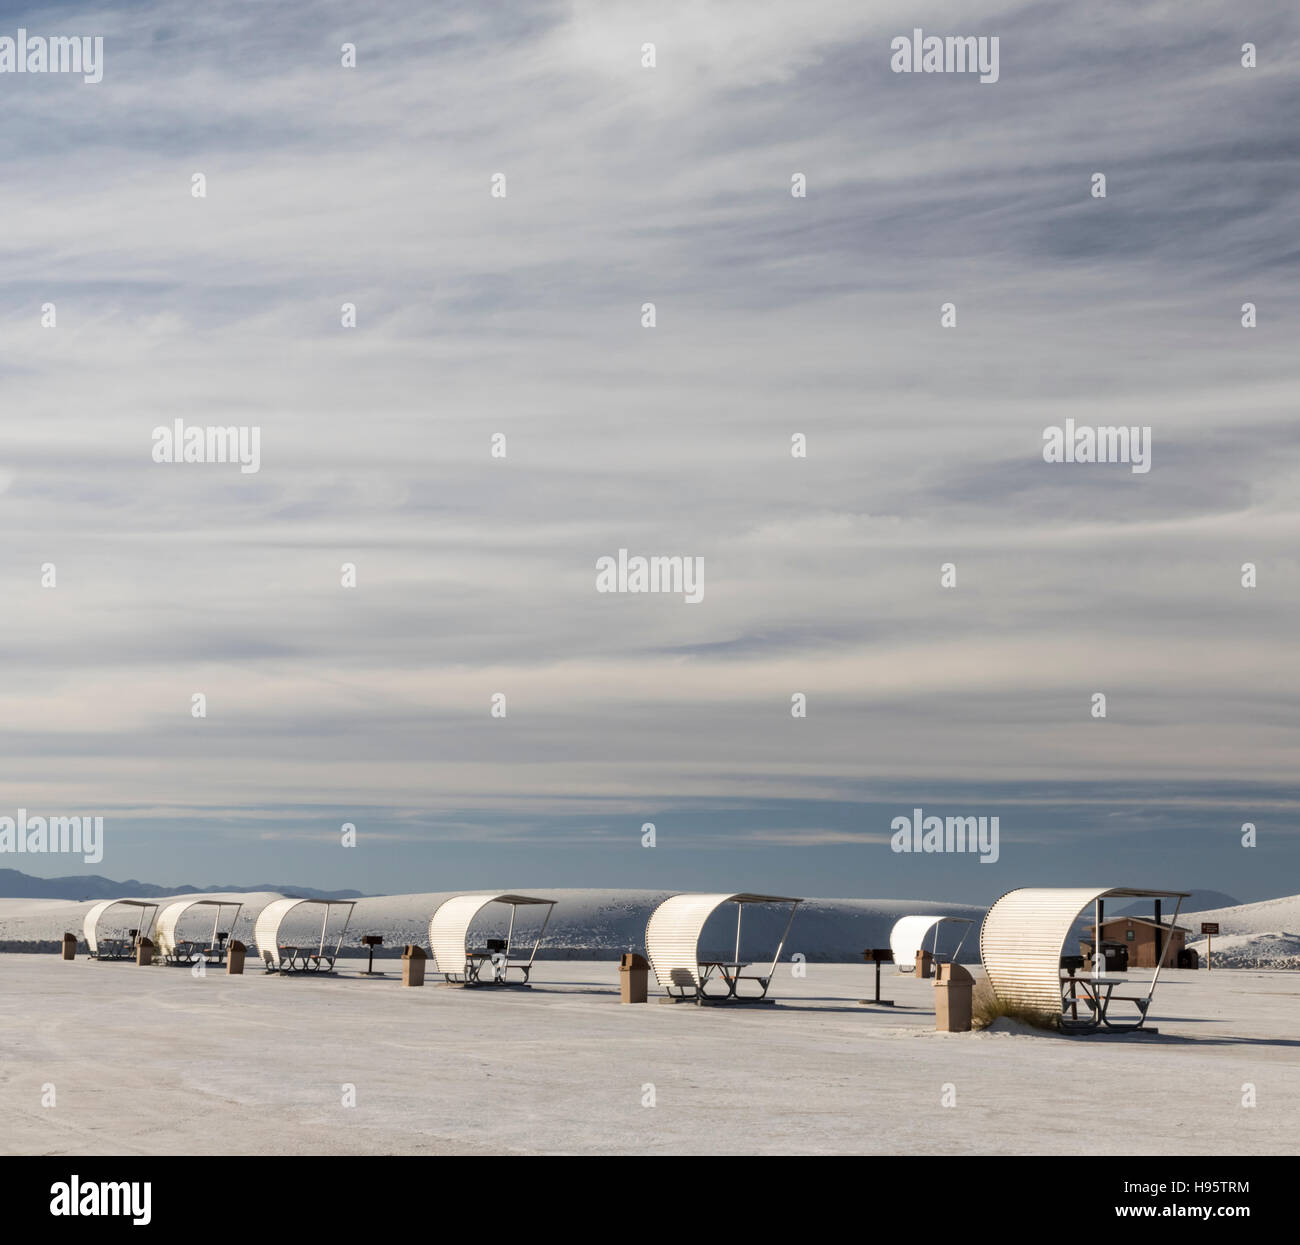 Row of shelters at picnic area, White Sands National Monument near Alamogordo, New Mexico, USA Stock Photo